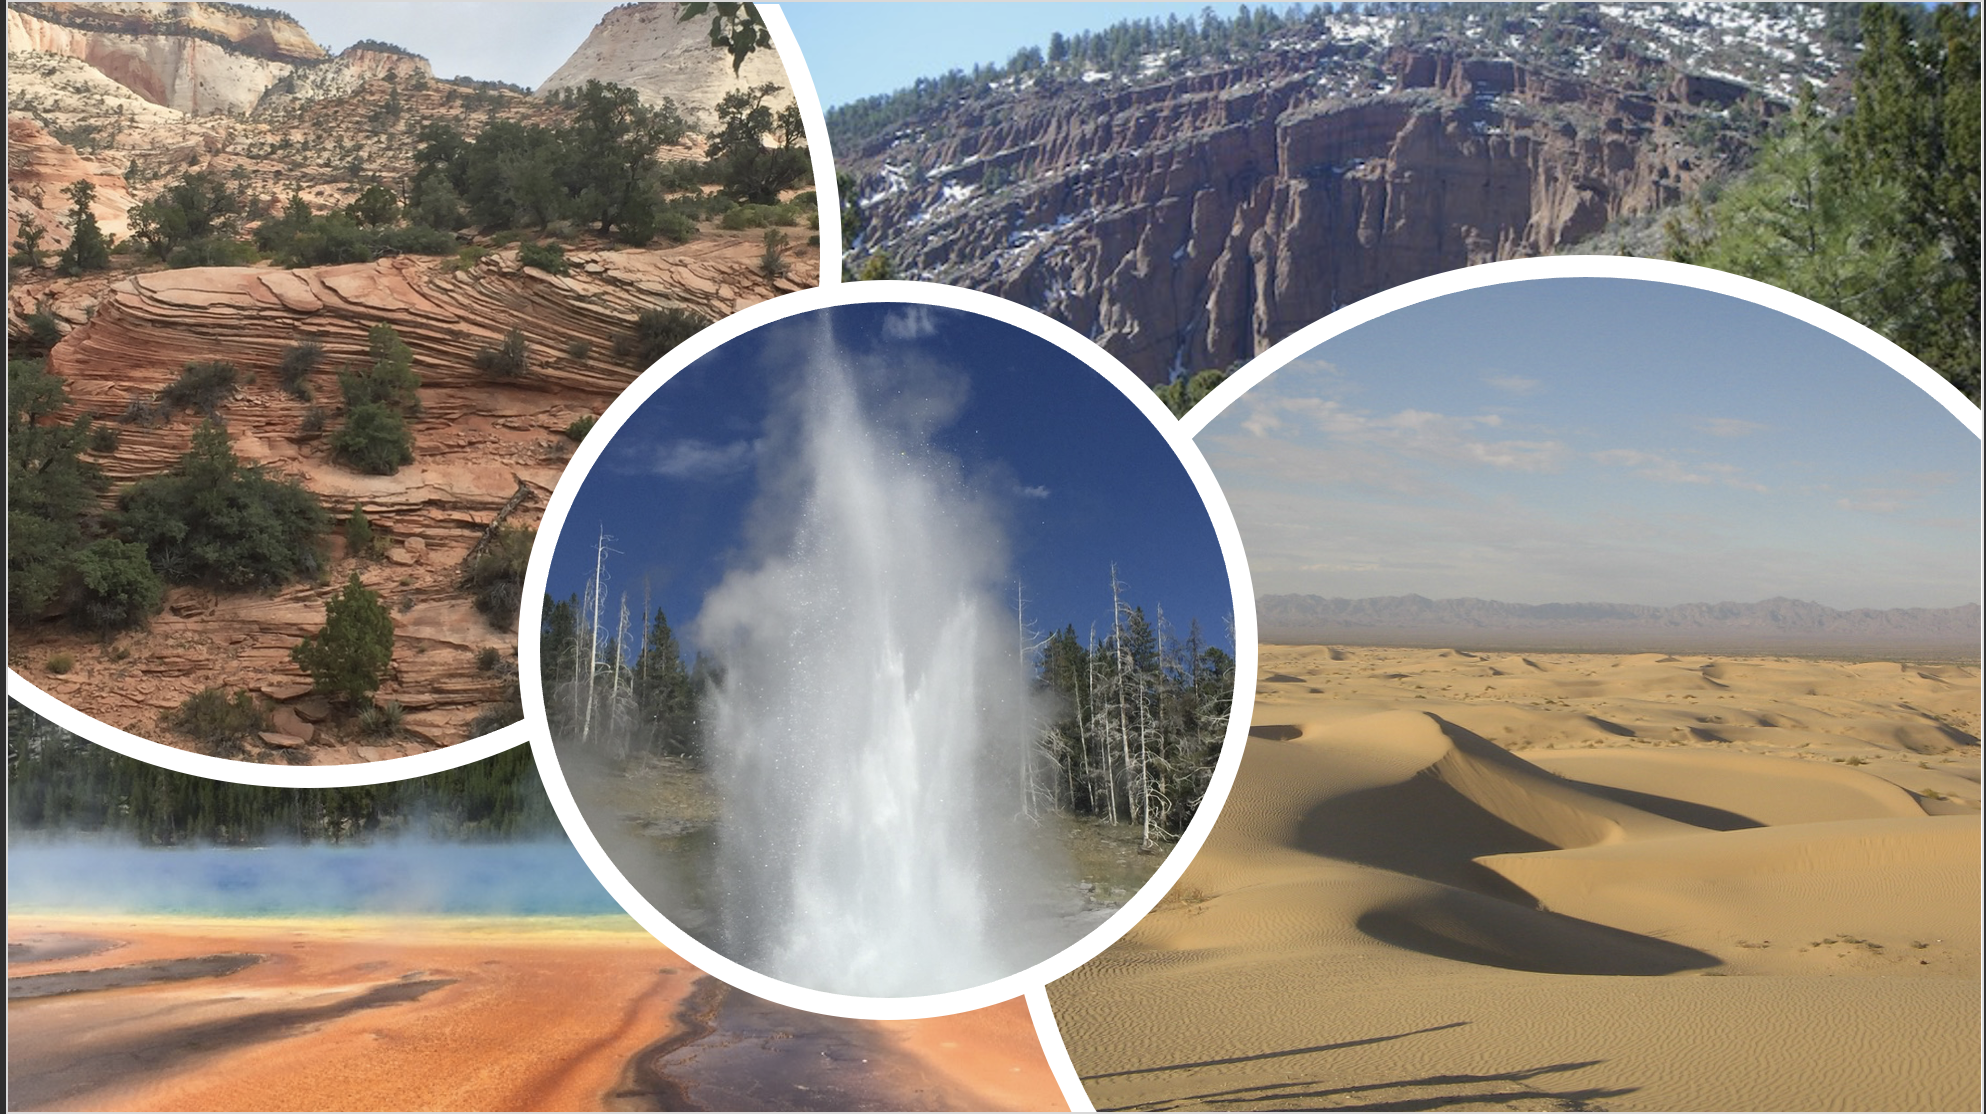 Collage of geologic sites and structures: Zion National park, Verde Valley, Grand Prismatic Yellowstone, Old Faithful Yellowstone, and Imperial Sand Dunes